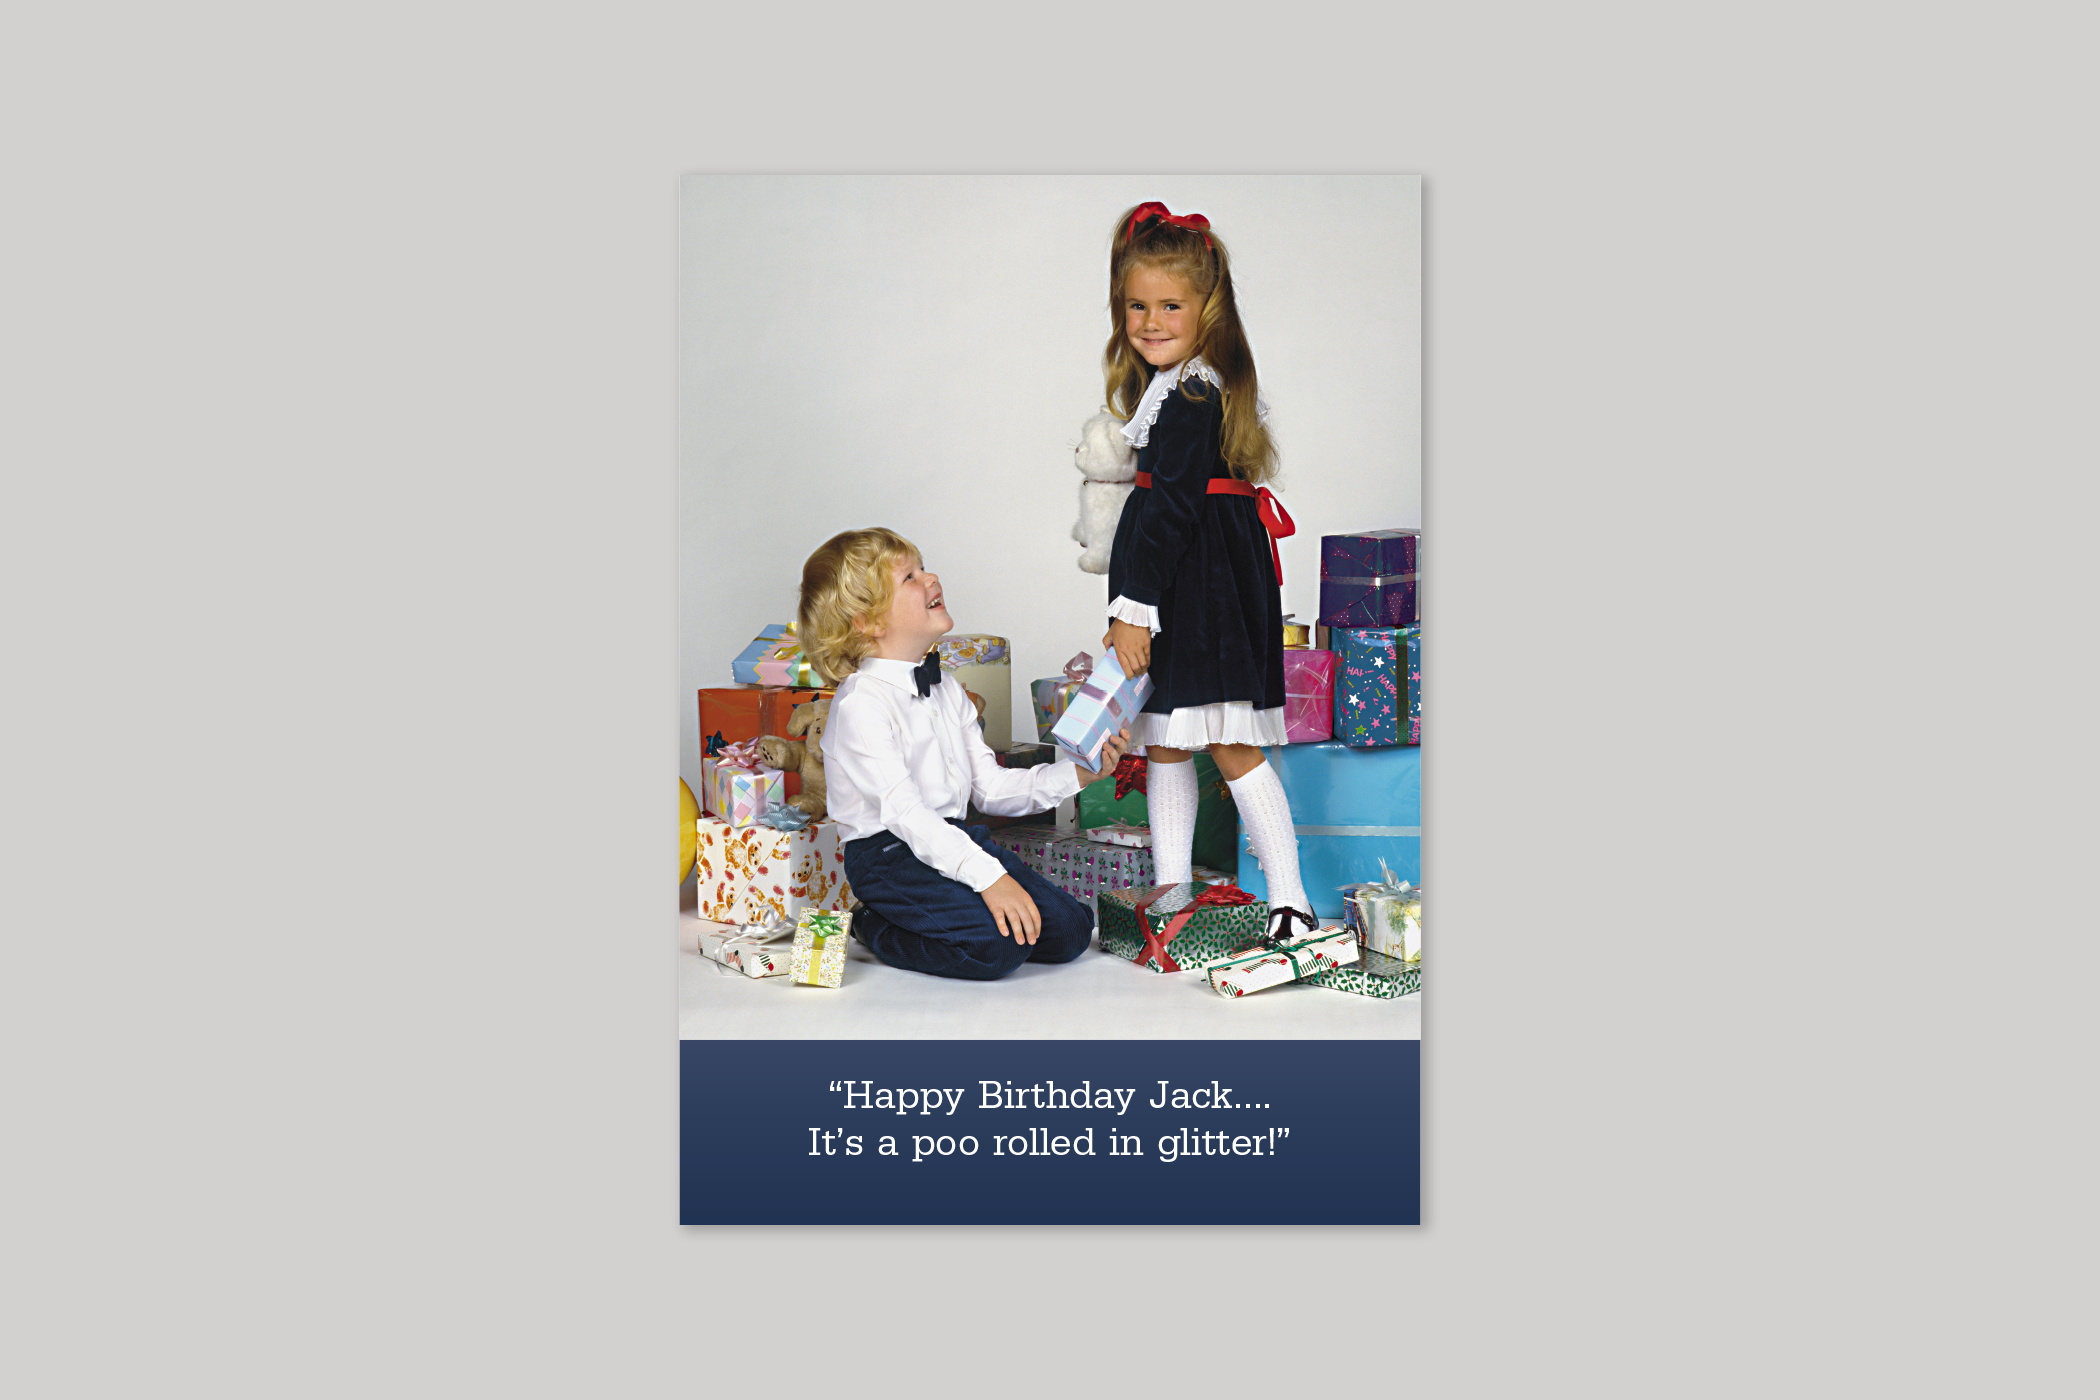 Happy Birthday Jack! from Blush humour range of greeting cards by Icon.